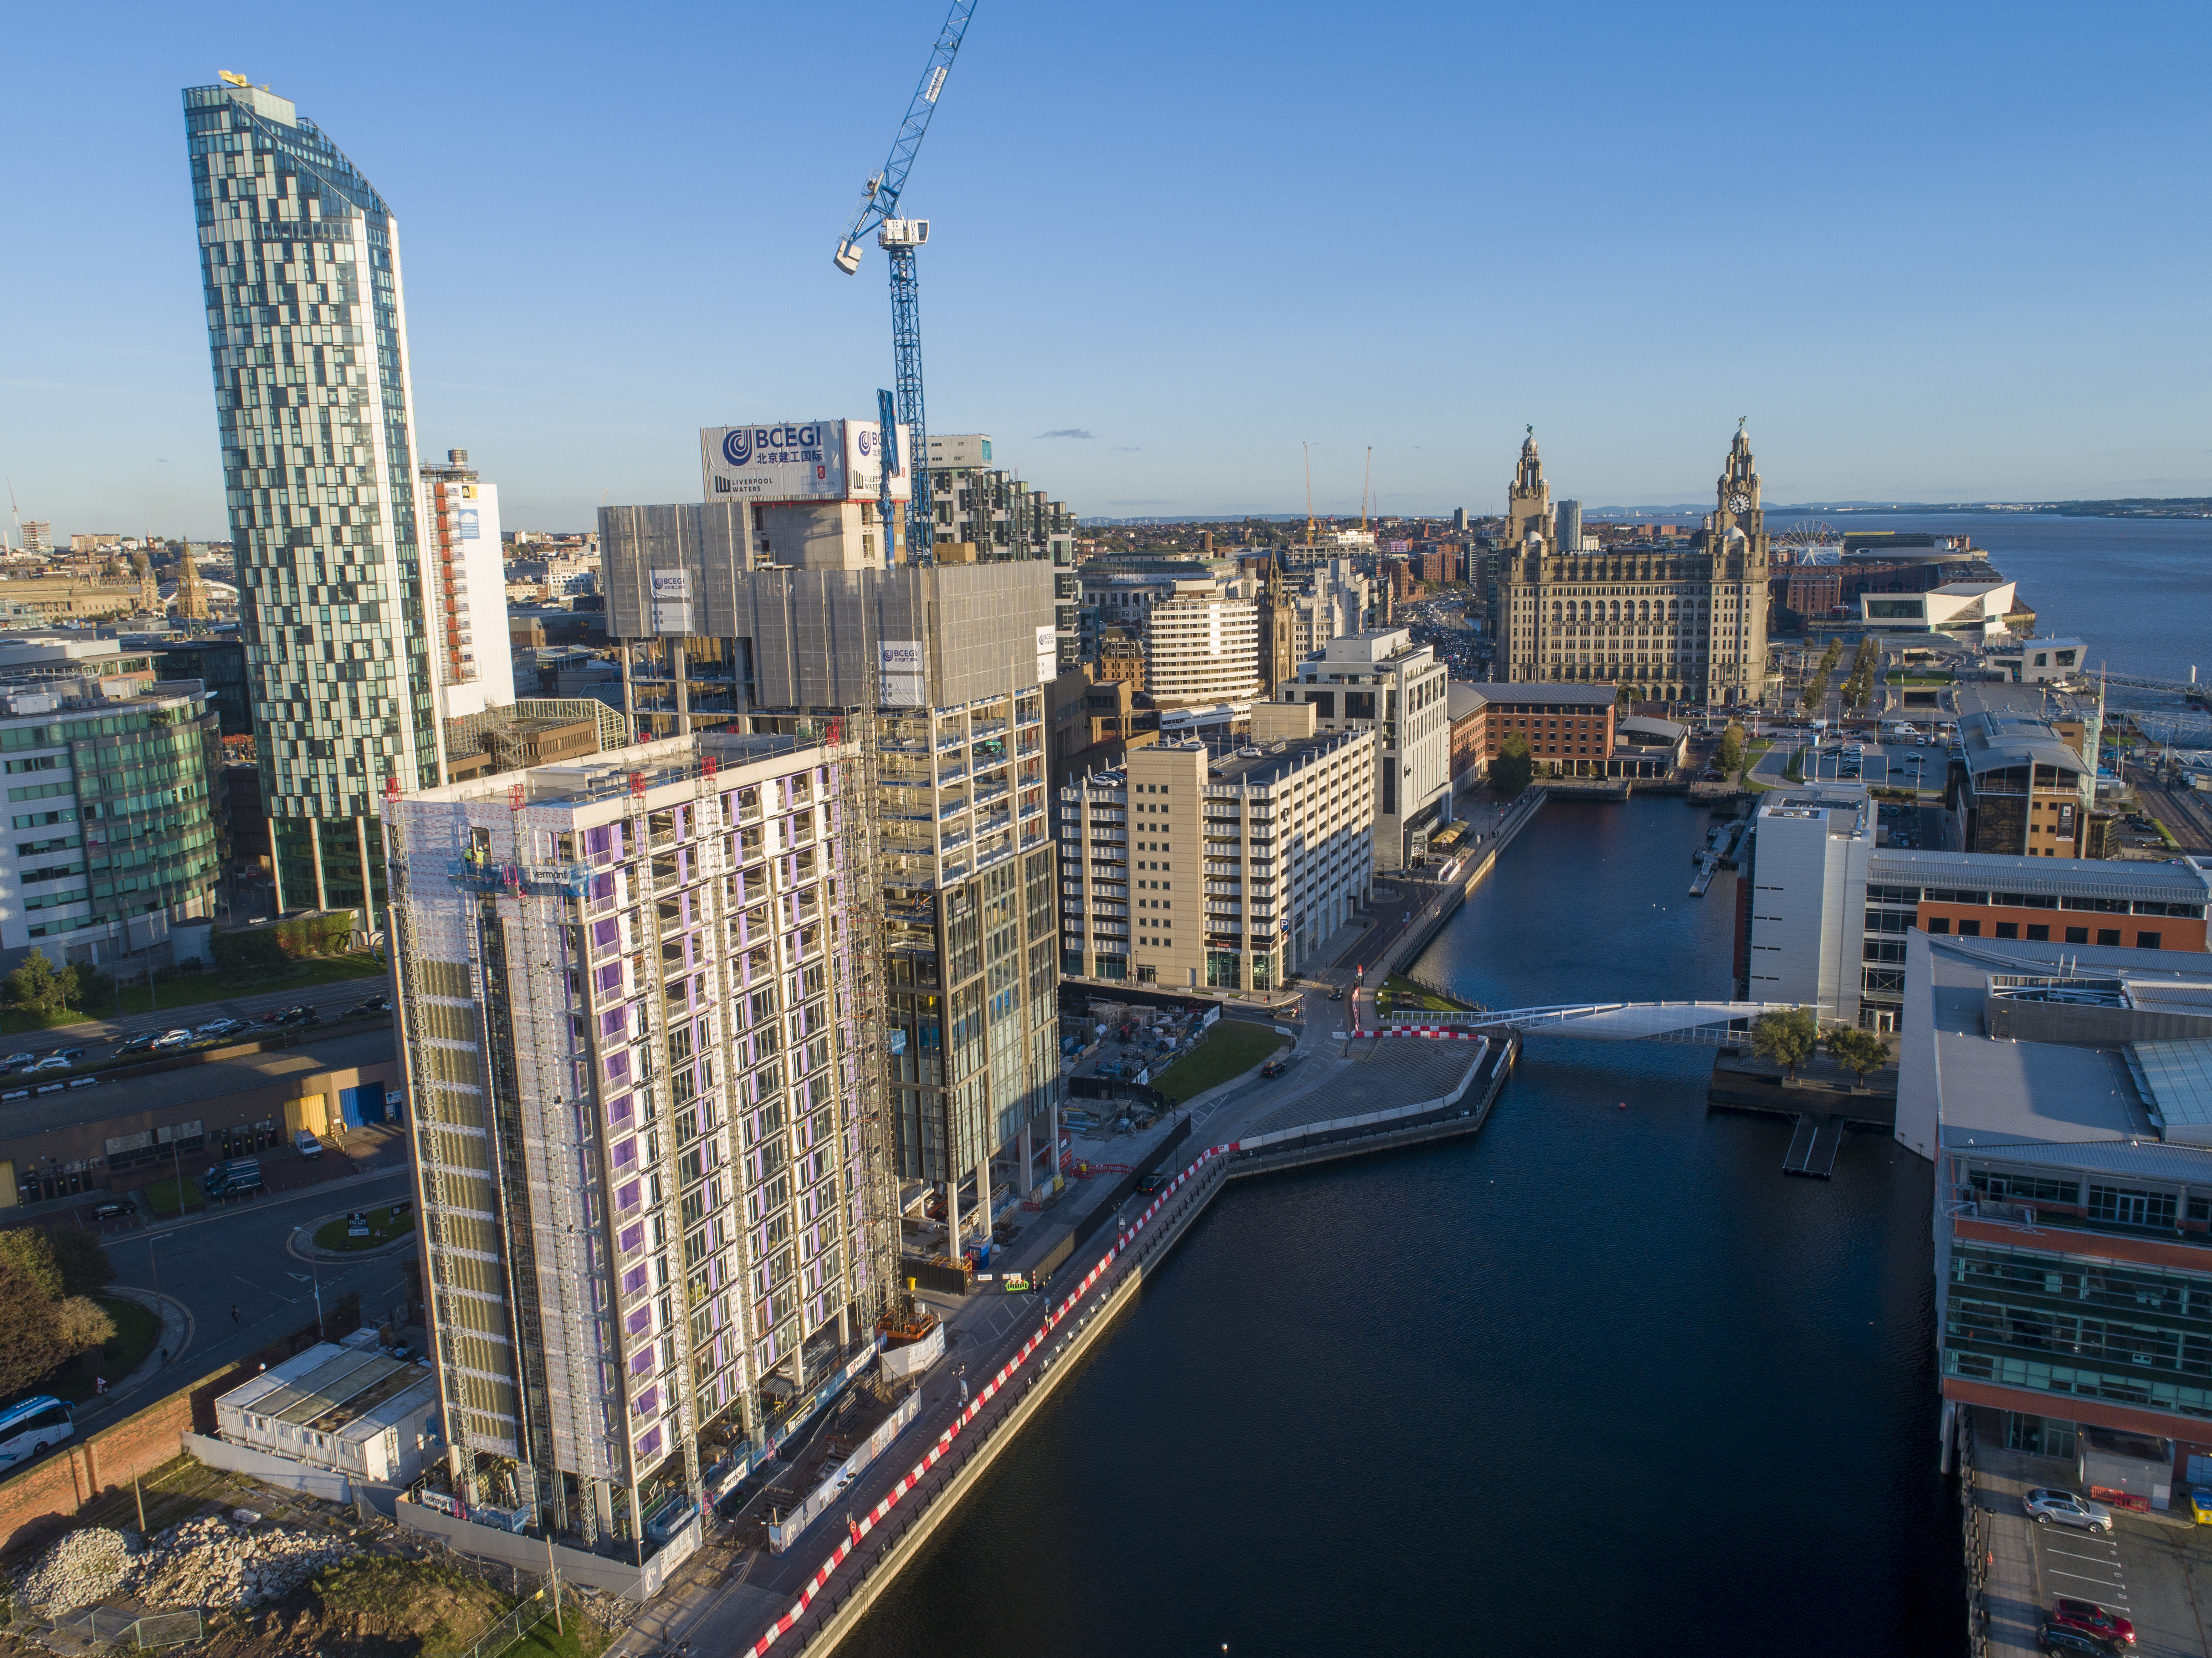 LIVERPOOL WATERS WELCOMES START-UPS TO PRINCES DOCK